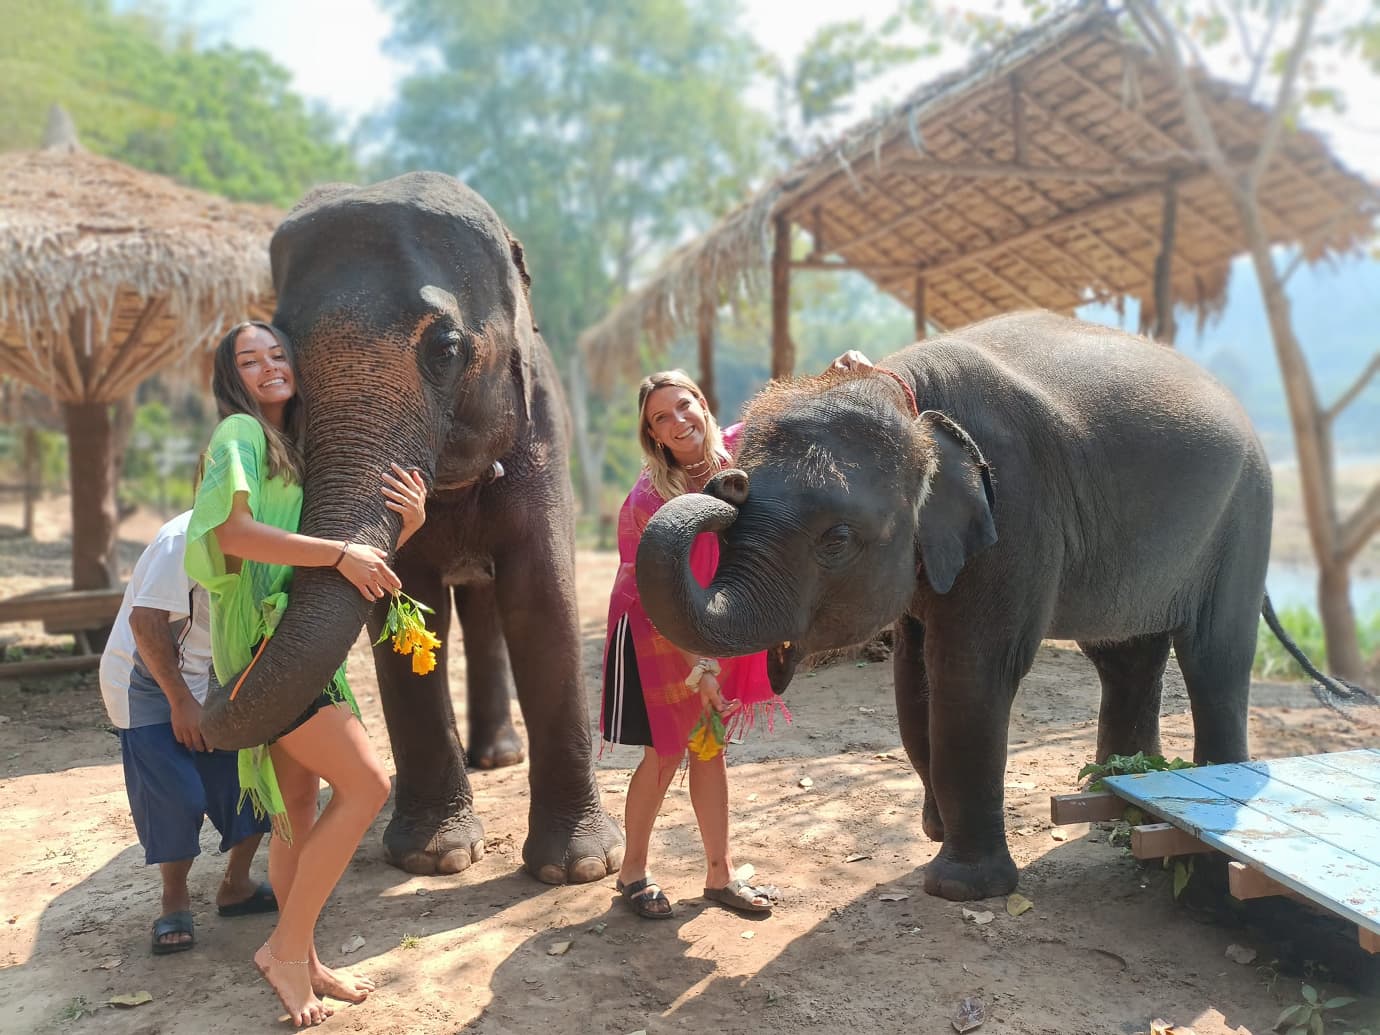 authentic-thailand-trip-10-days-Elephant-Sanctuary-in-Chiang-Mai-32.jpg